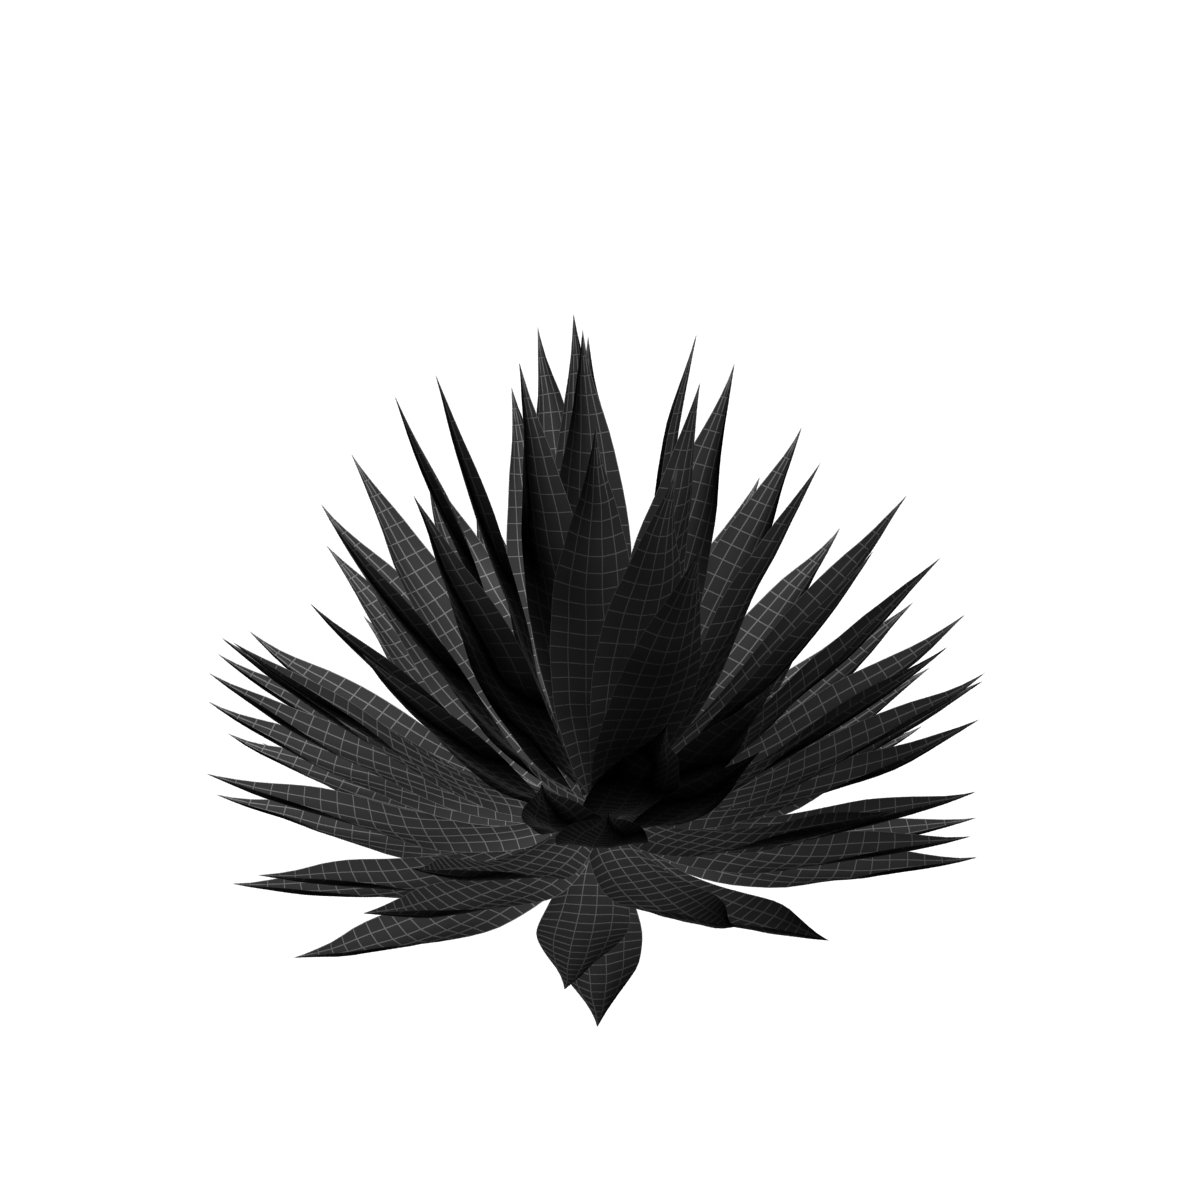 Black and white photo of a flower on a white background.